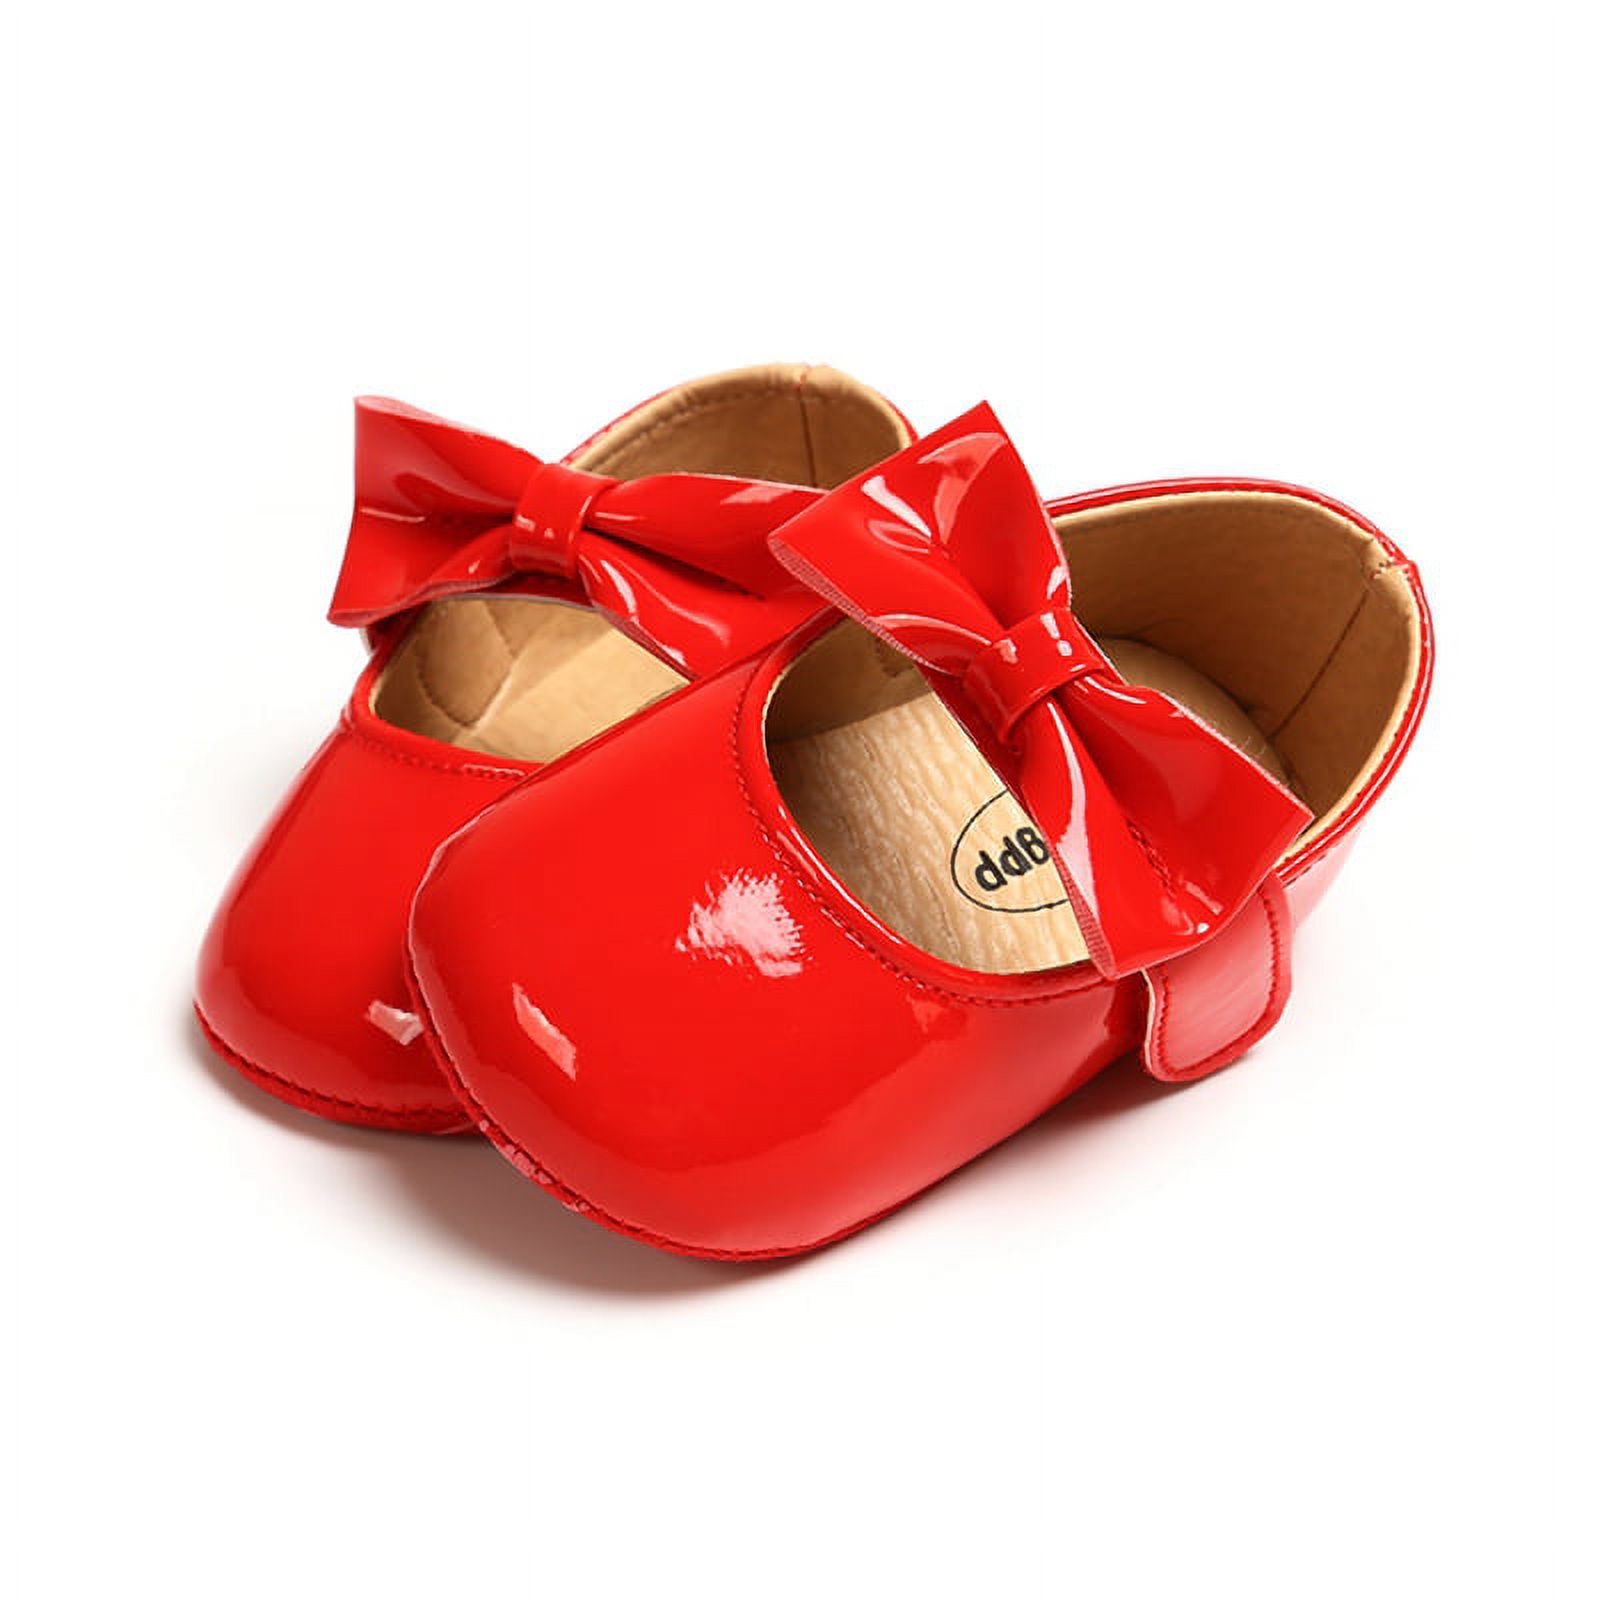 Maxcozy Infant Toddler Baby Girl's Soft Sole Anti-Slip Casual Shoes PU Leather Bowknot Princess Shoes - image 4 of 8